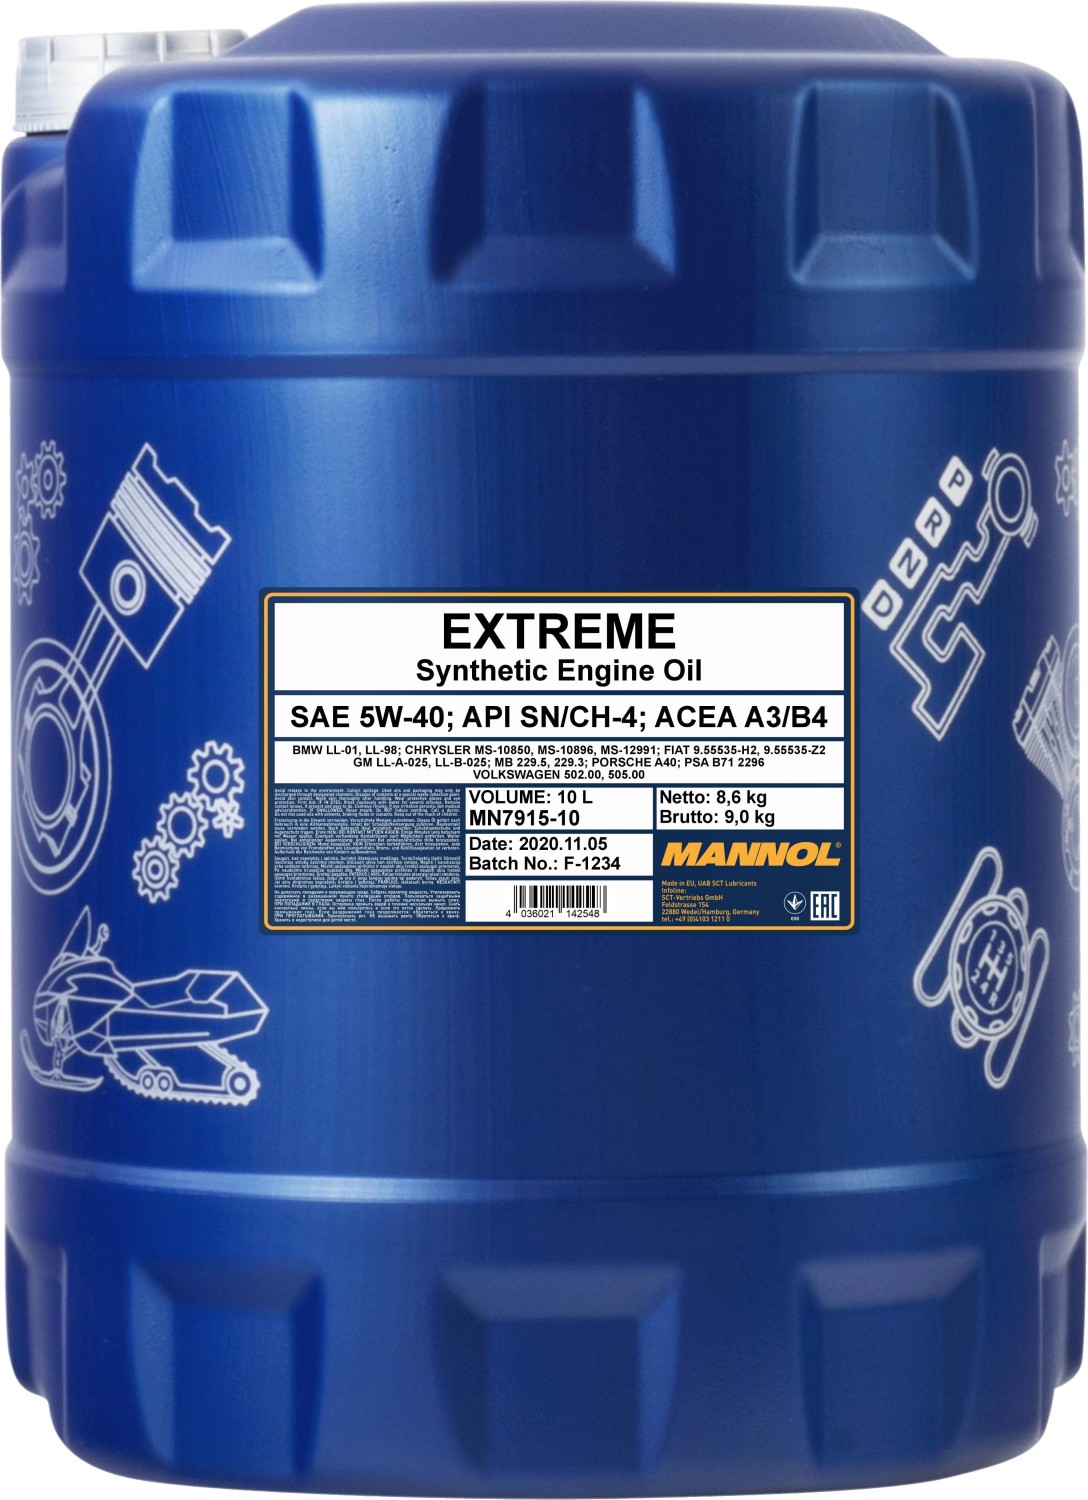 Mannol Extreme 5W-40 10l (MN7915-10) starting from £ 48.99 (2023